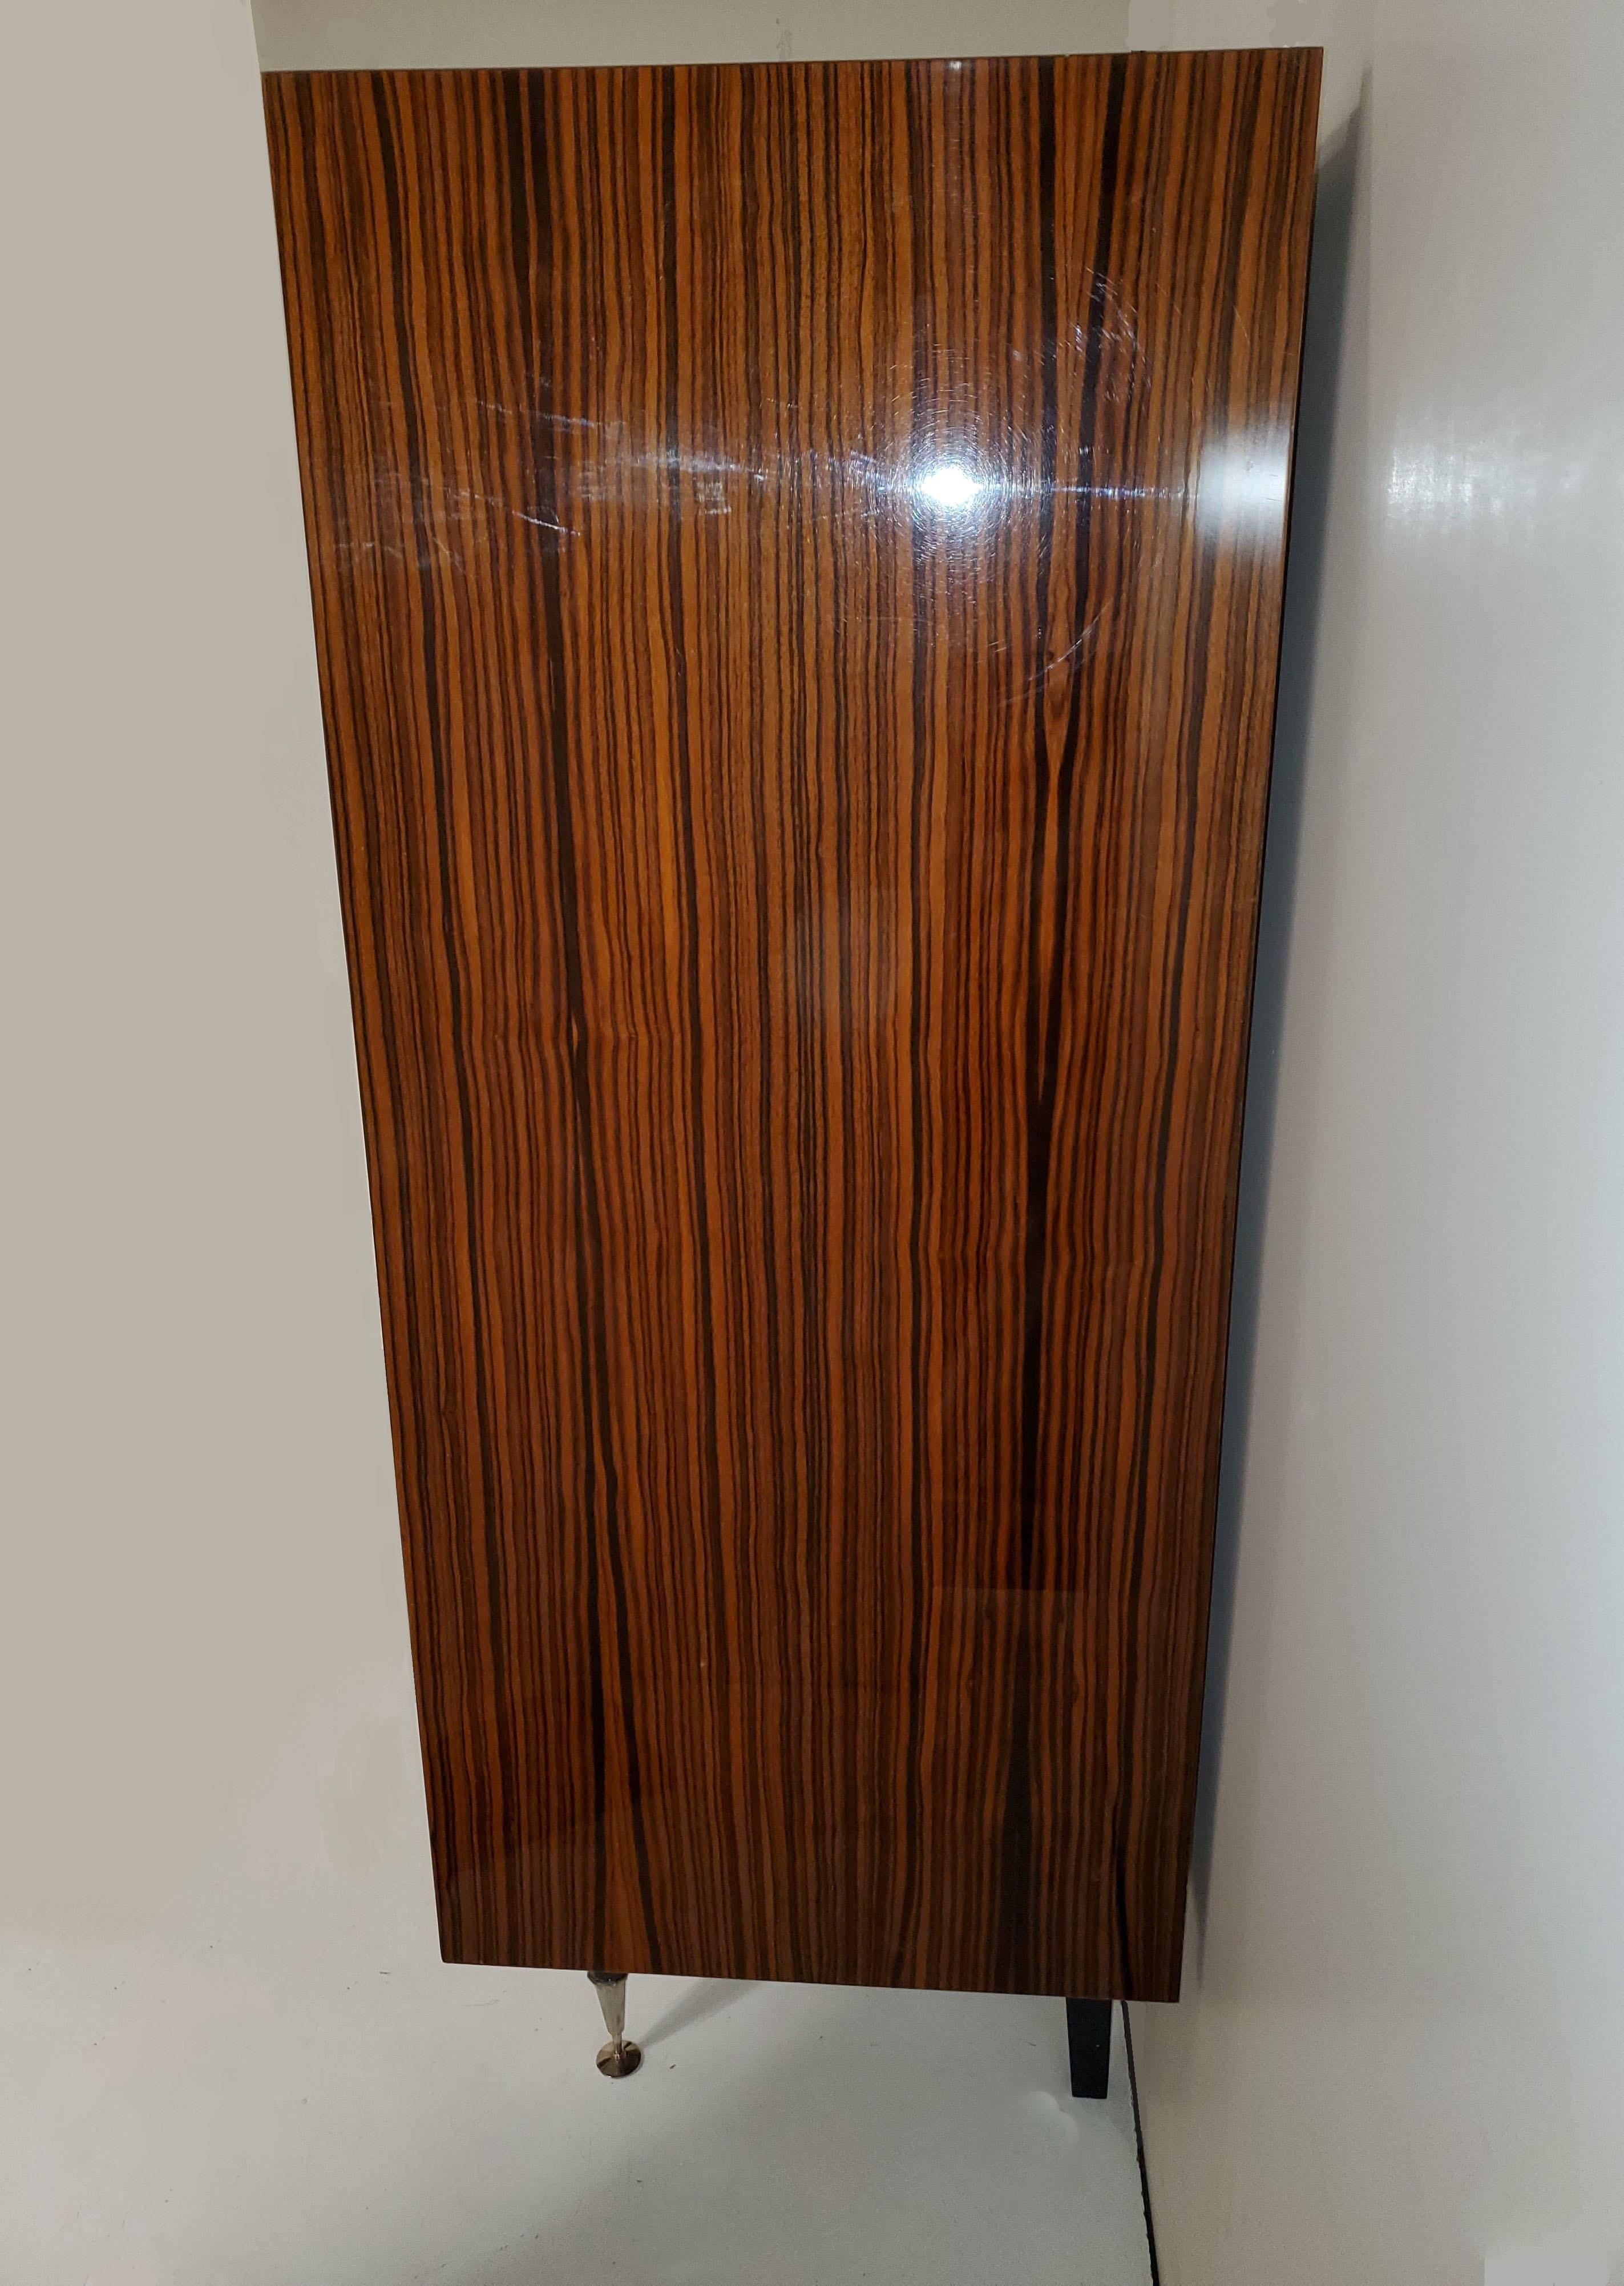 Tall and Narrow Original French Macassar Ebony Inlaid Cabinet For Sale 9